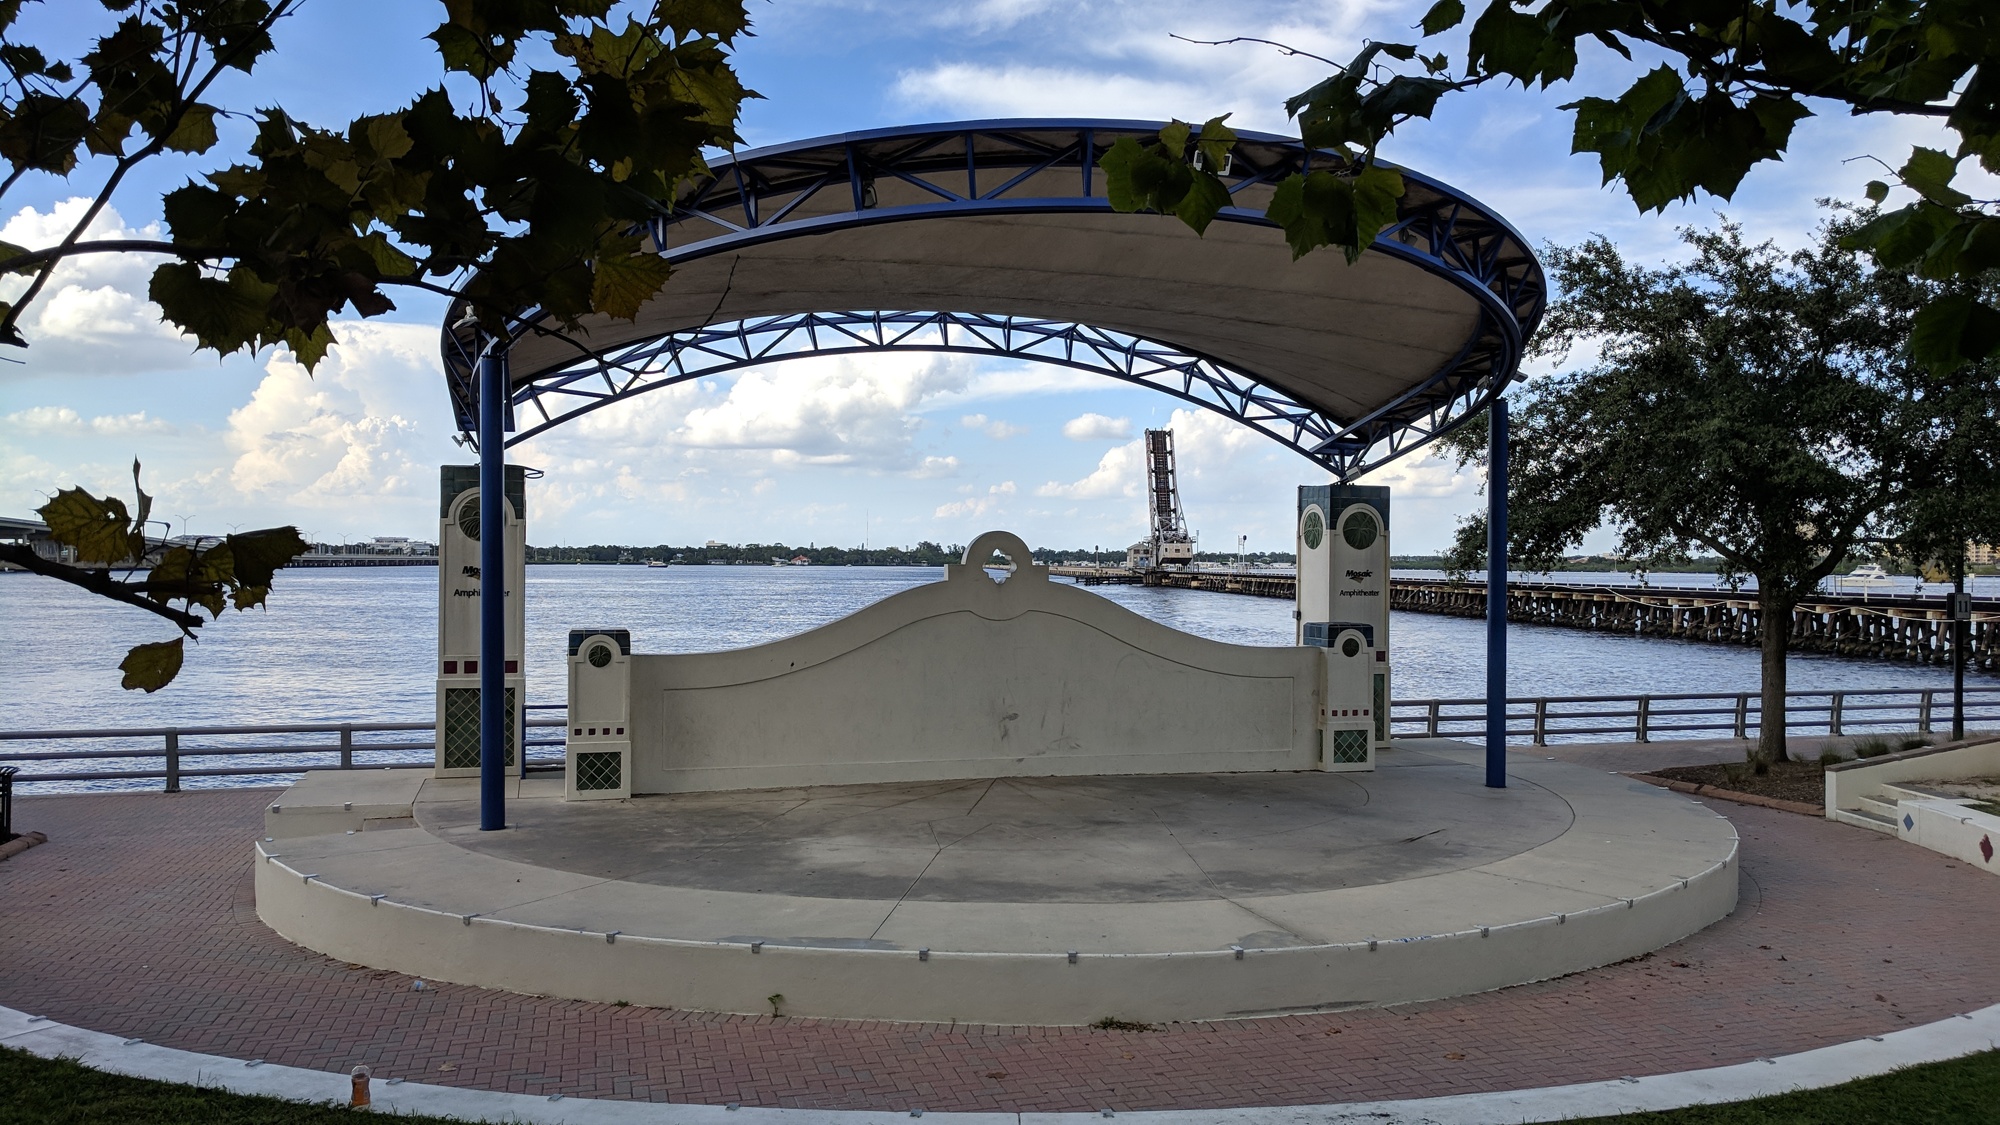 Area leaders echo that a more modest-sized venue comparable to Mosaic Amphitheater on the Bradenton Riverwalk would be a better fit.